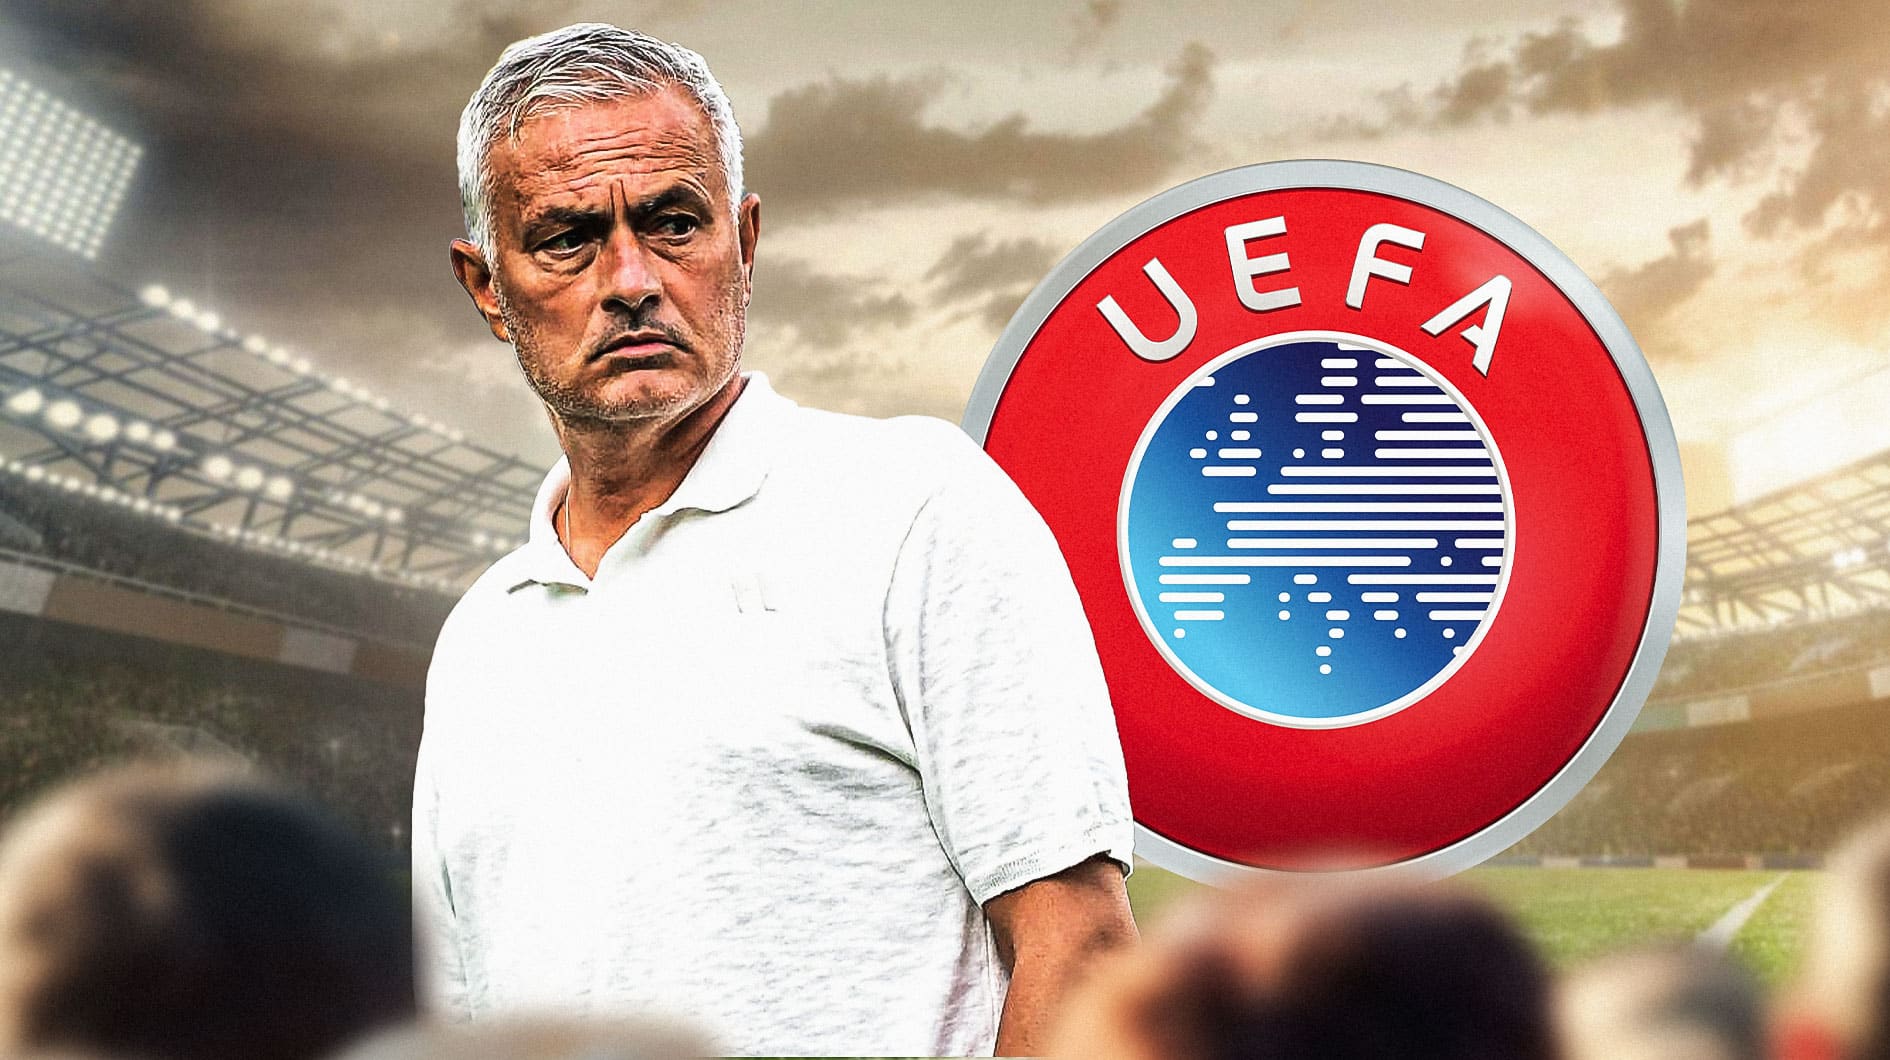 Jose Mourinho blasts UEFA after Fenerbahce's thrilling Champions League win